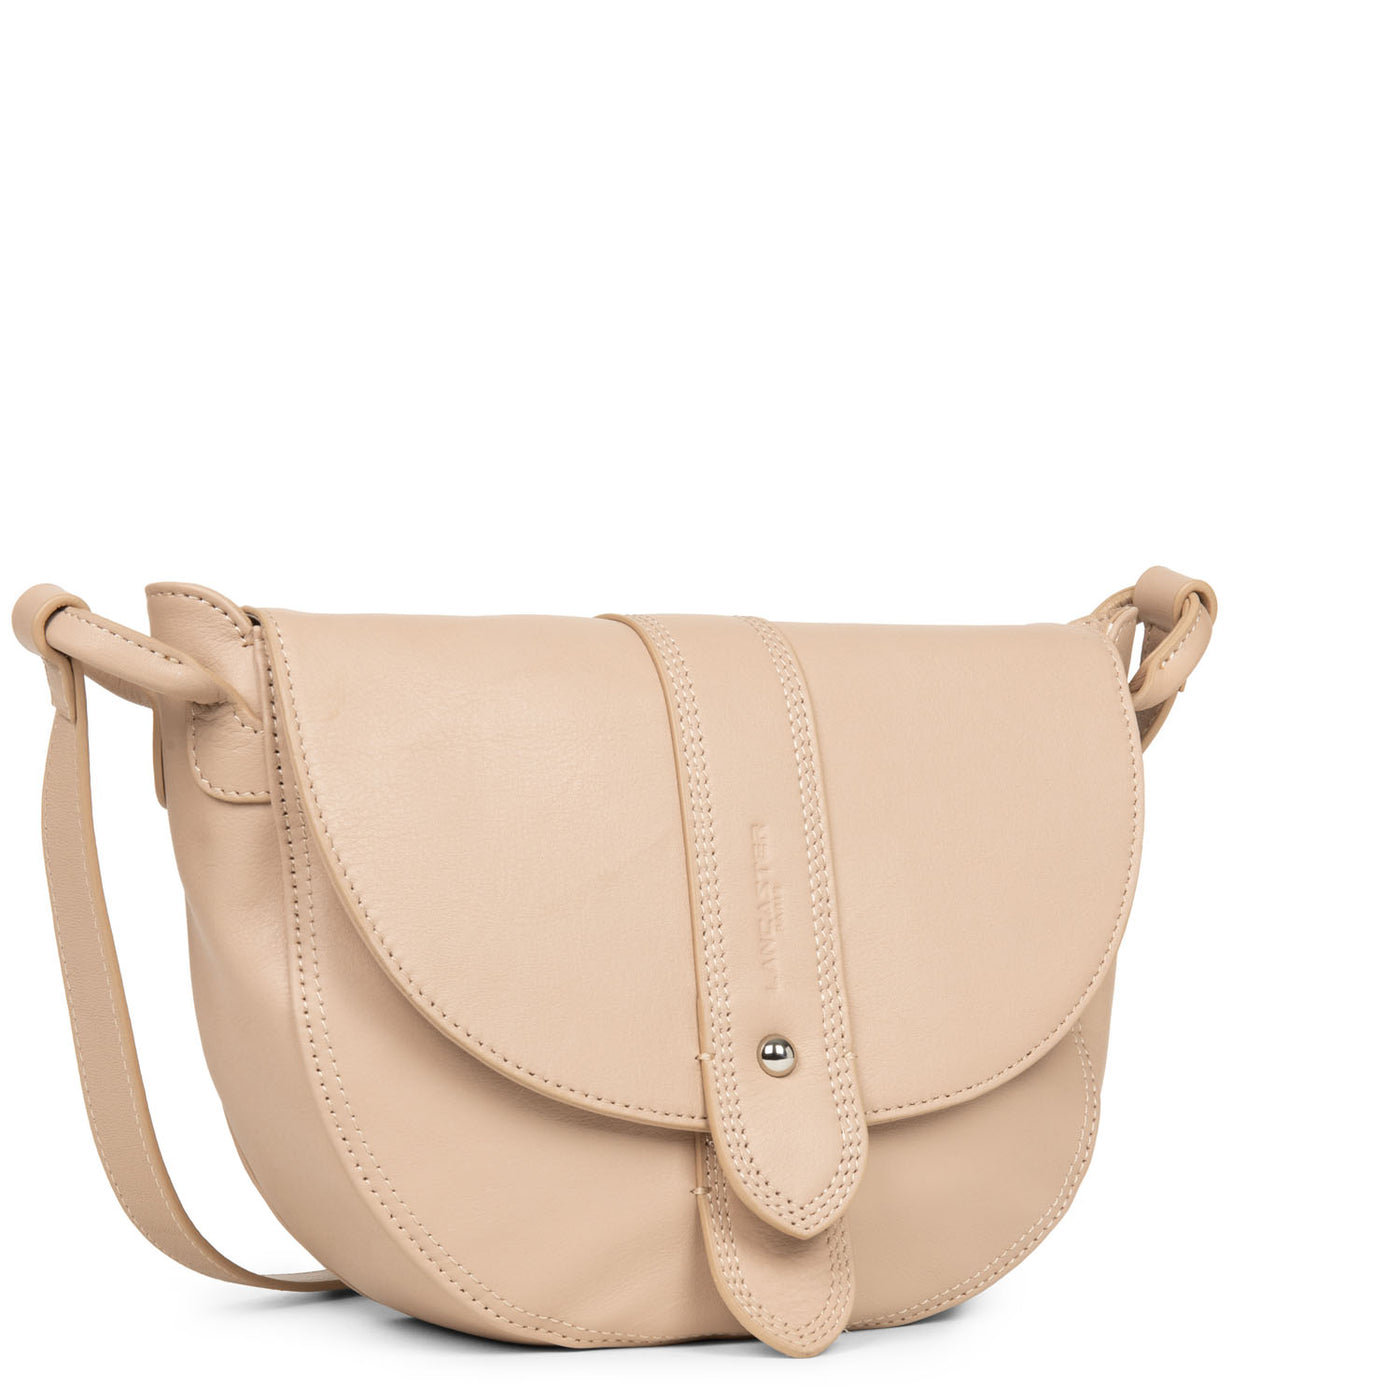 sac besace - soft vintage #couleur_cappuccino